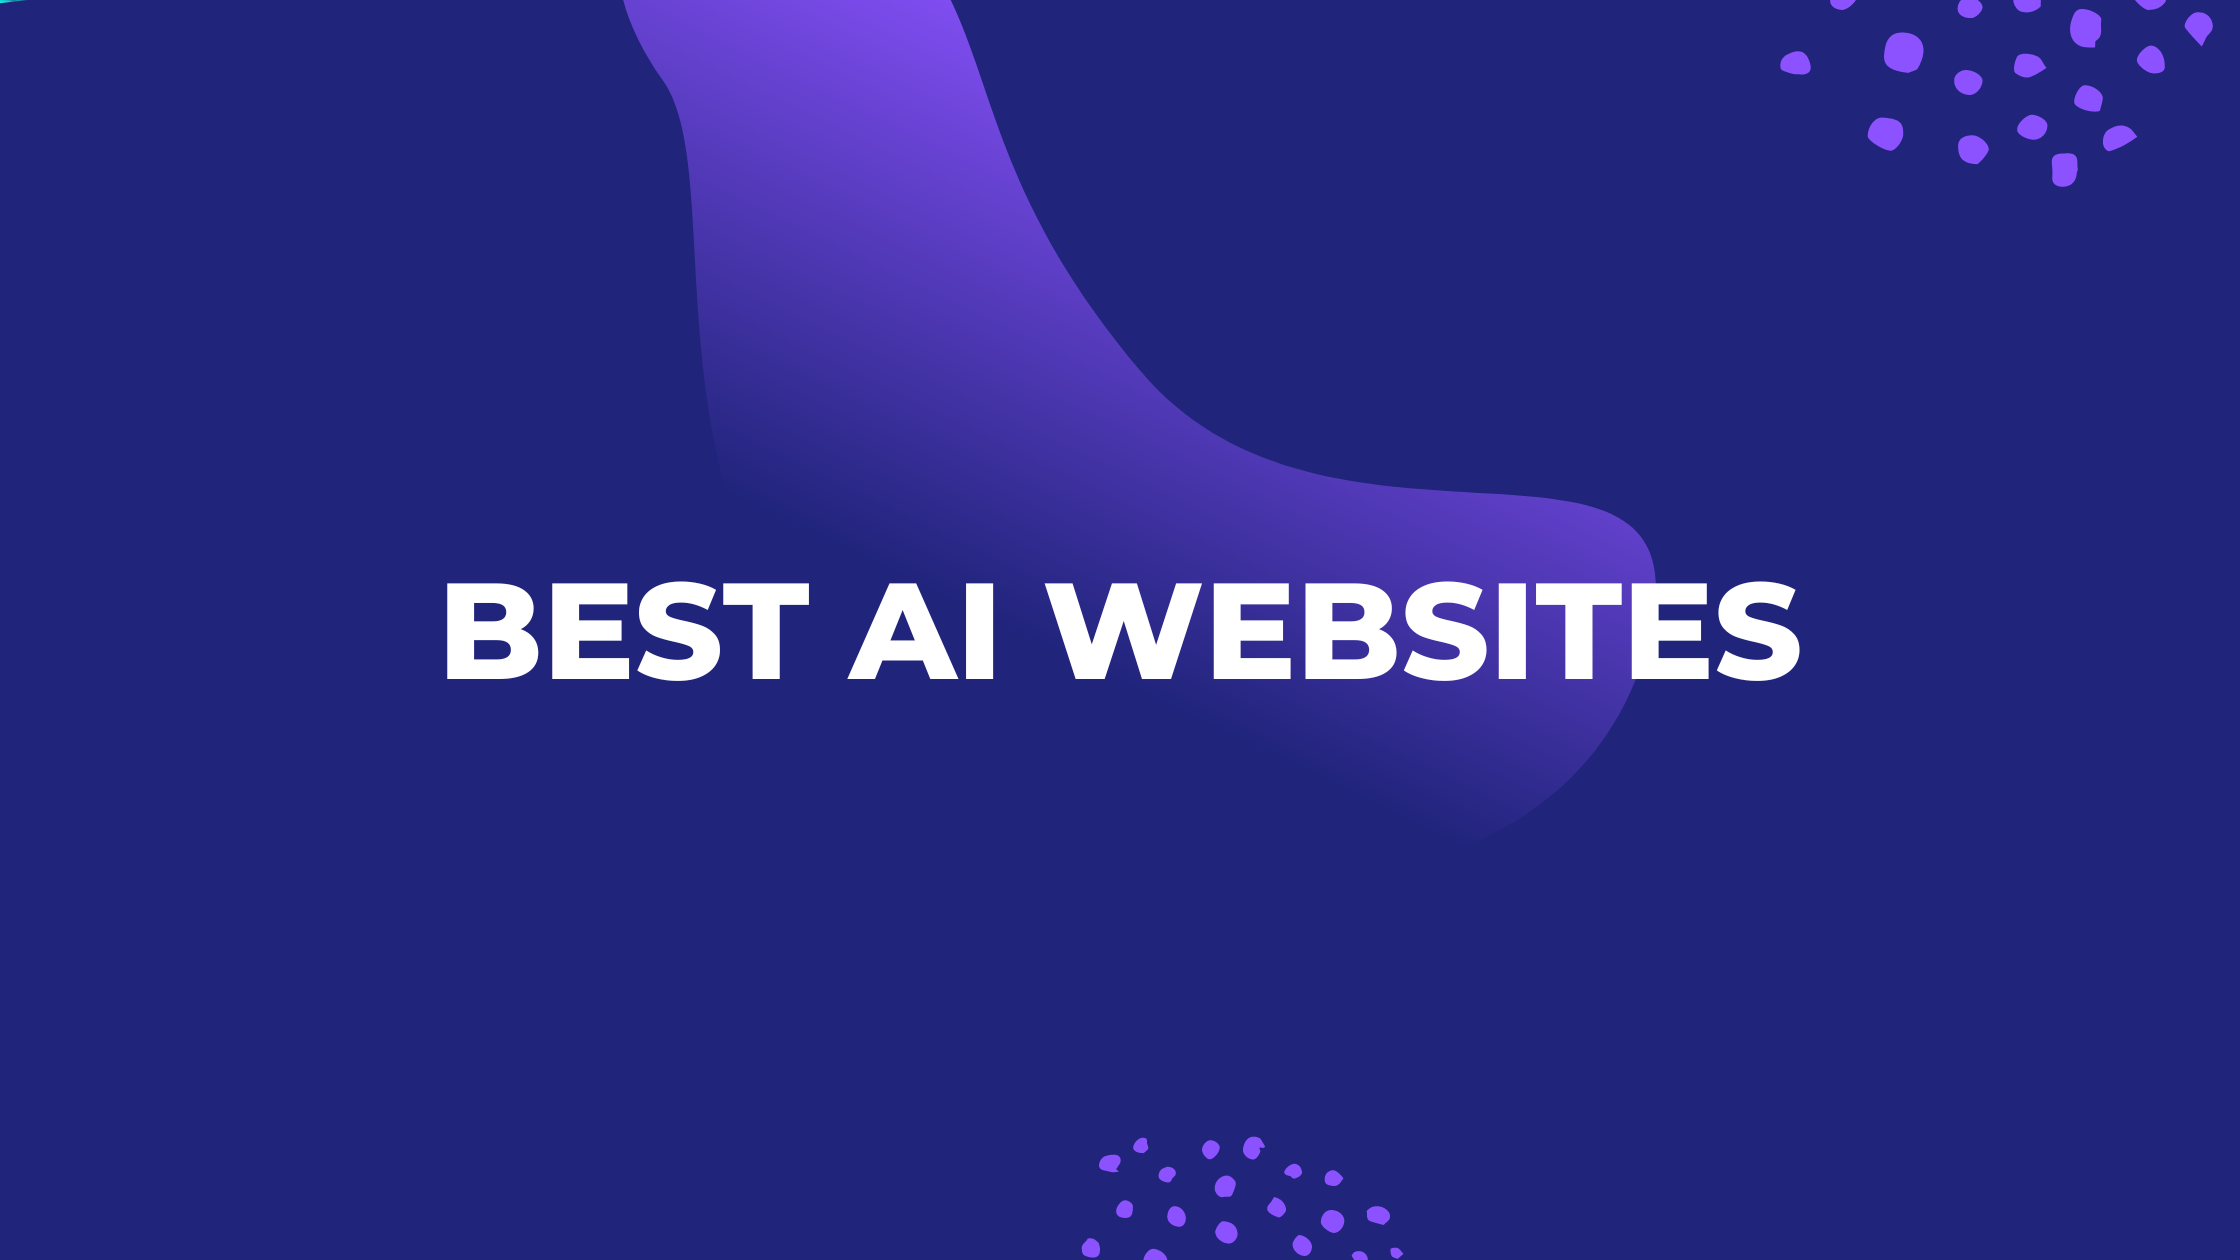 What are The Best AI Websites to Learn About AI in 2022?